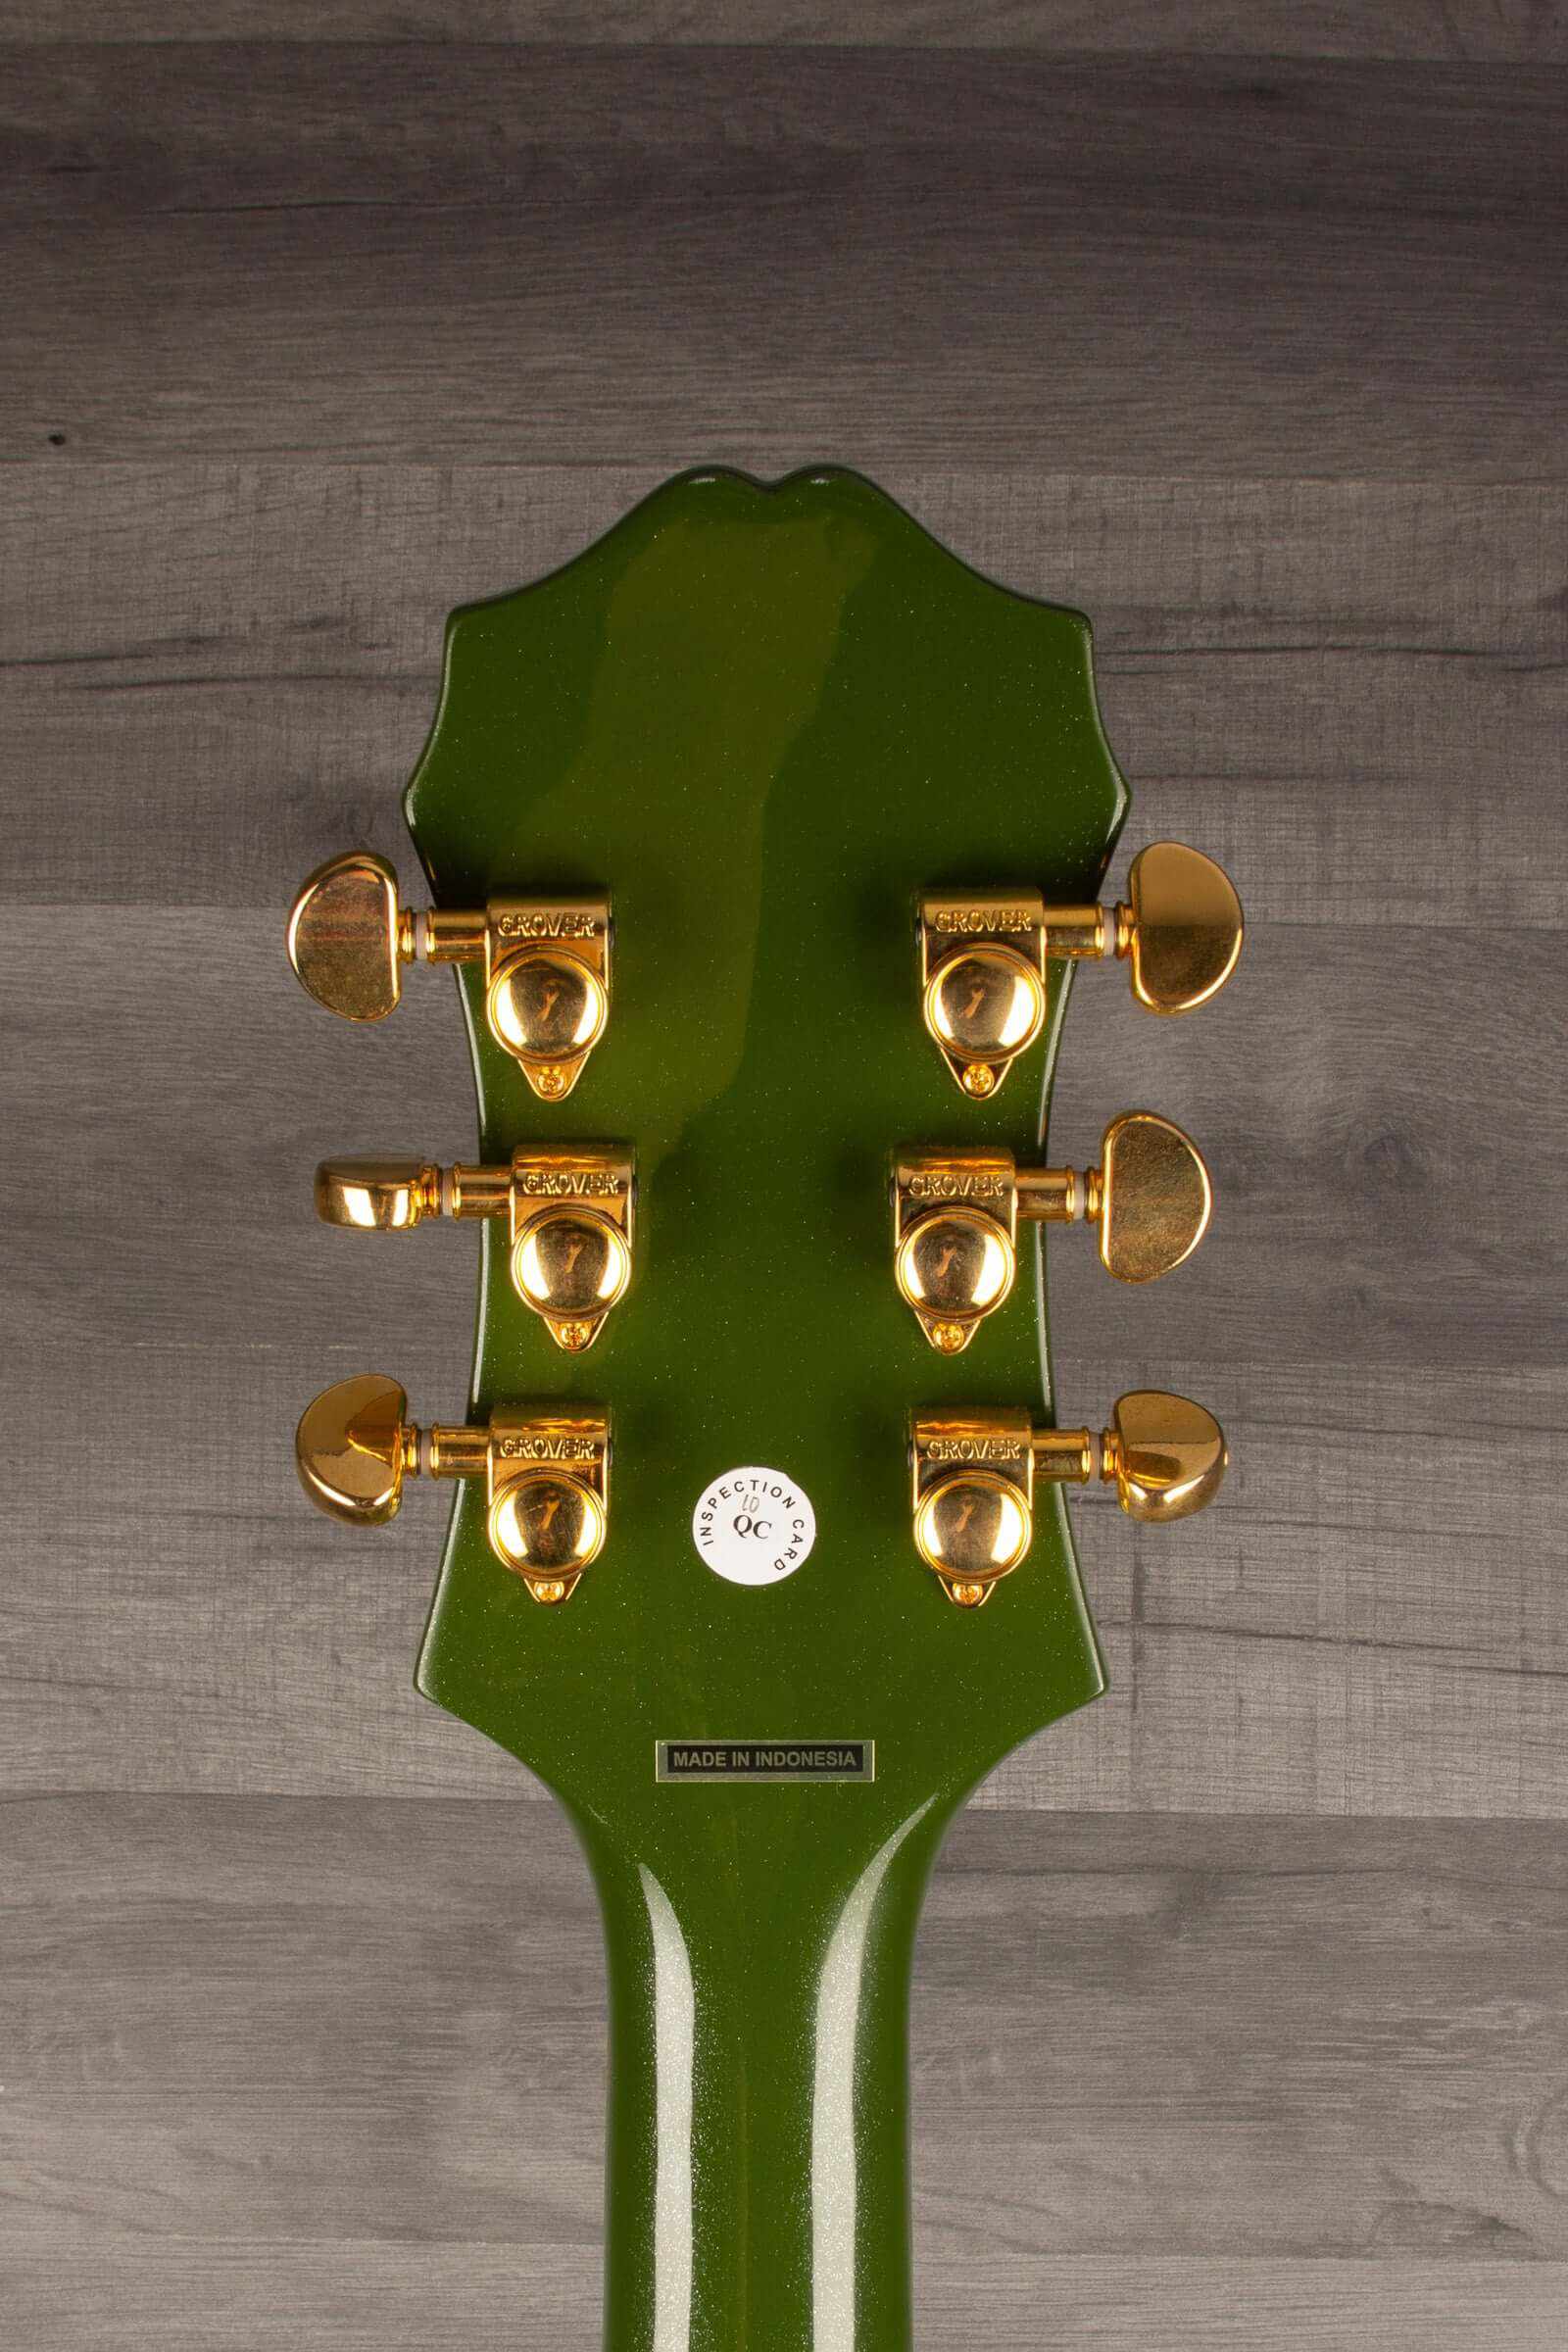 USED - Epiphone Emperor Swingster Forest green metallic inc hard case | MusicStreet